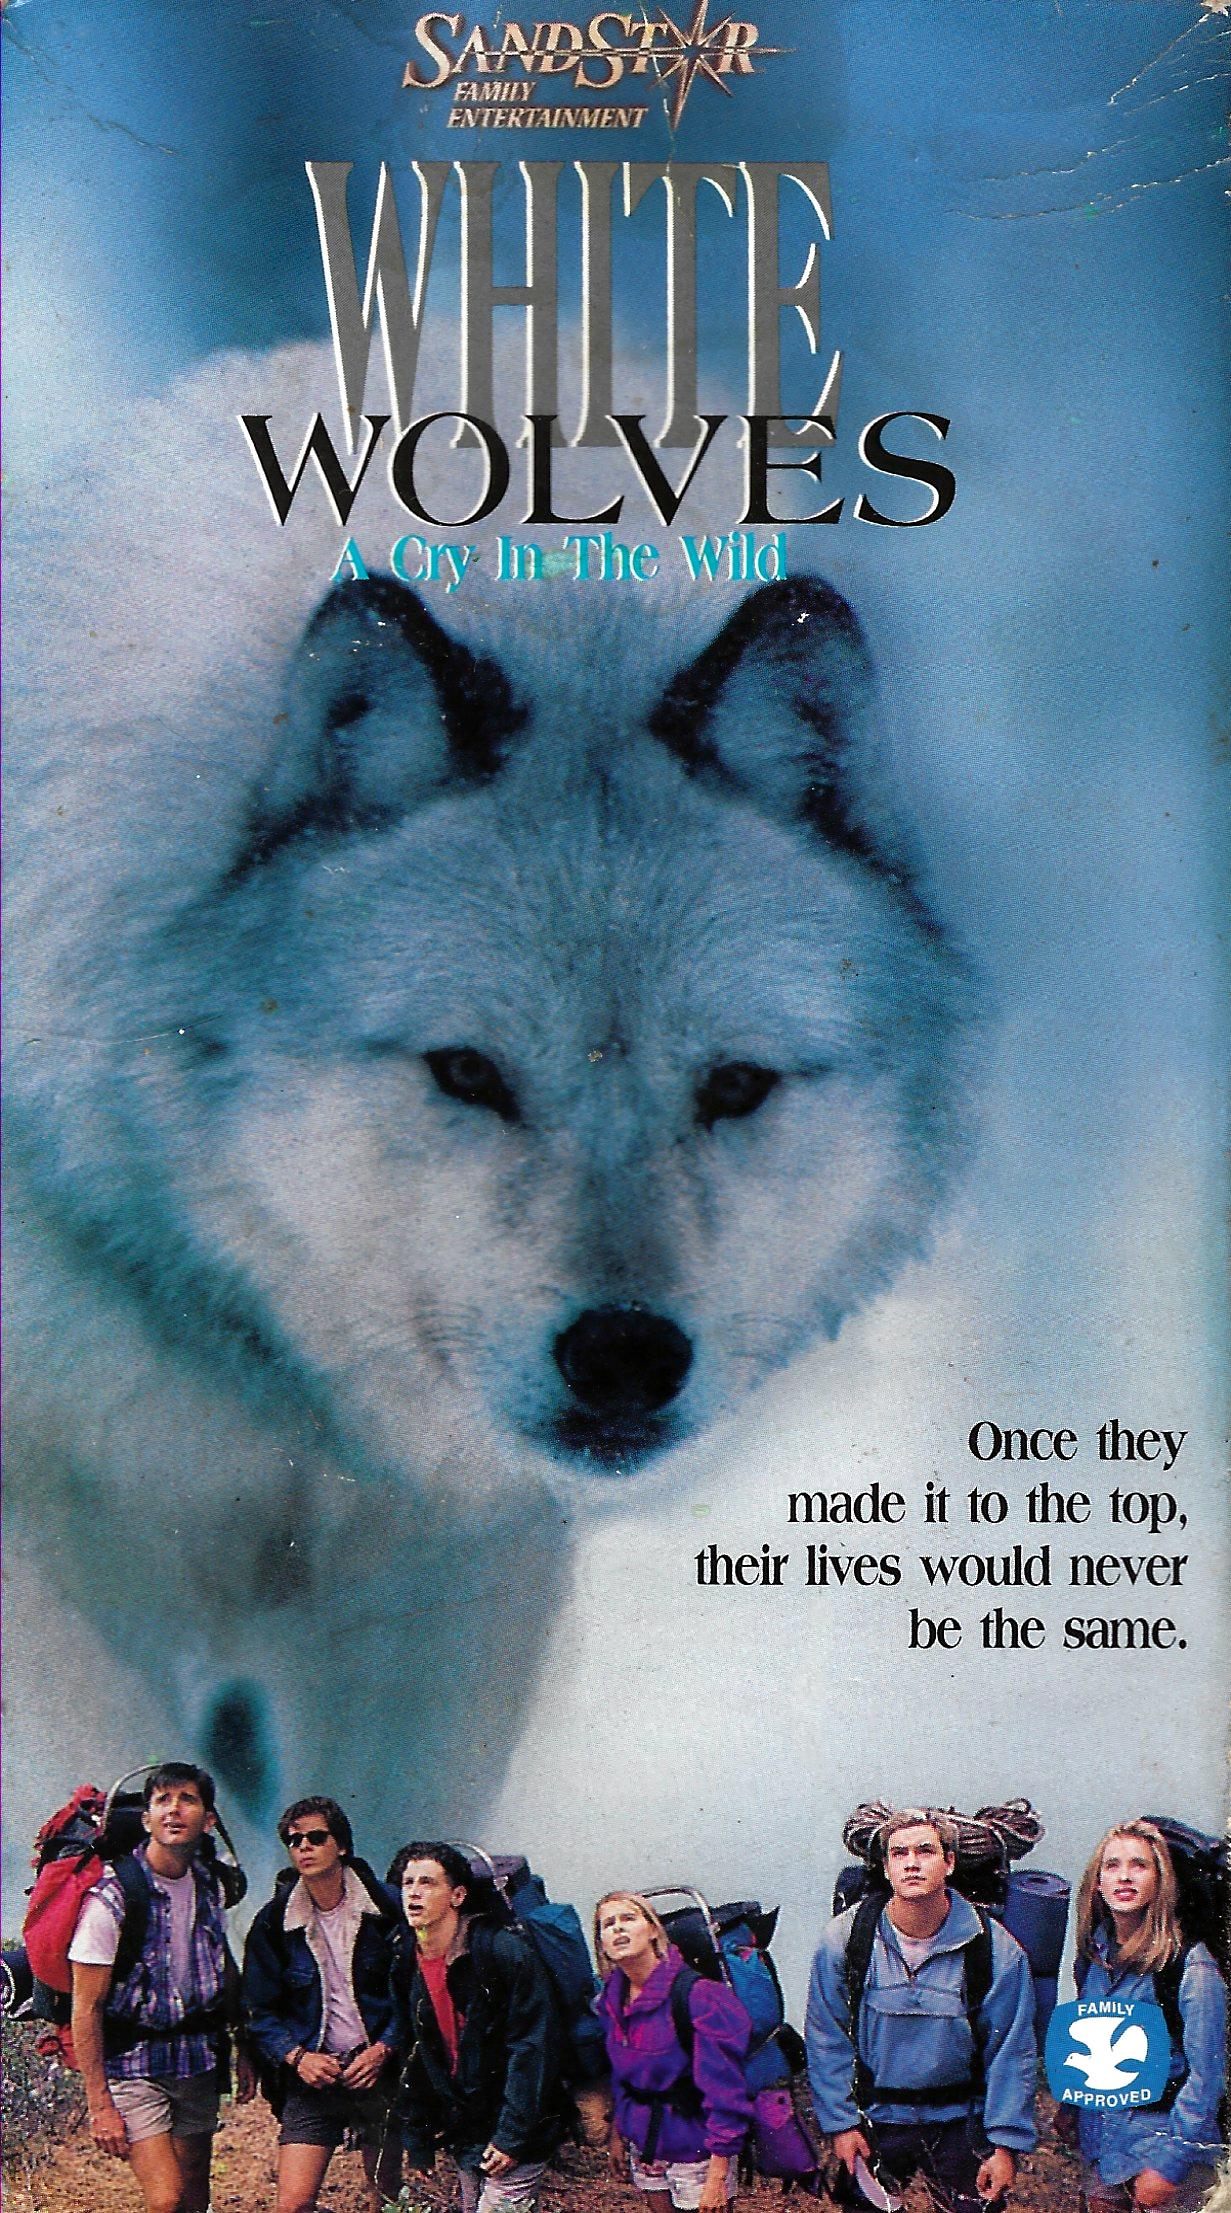 White Wolves: A Cry in the Wild II (1993) Screenshot 5